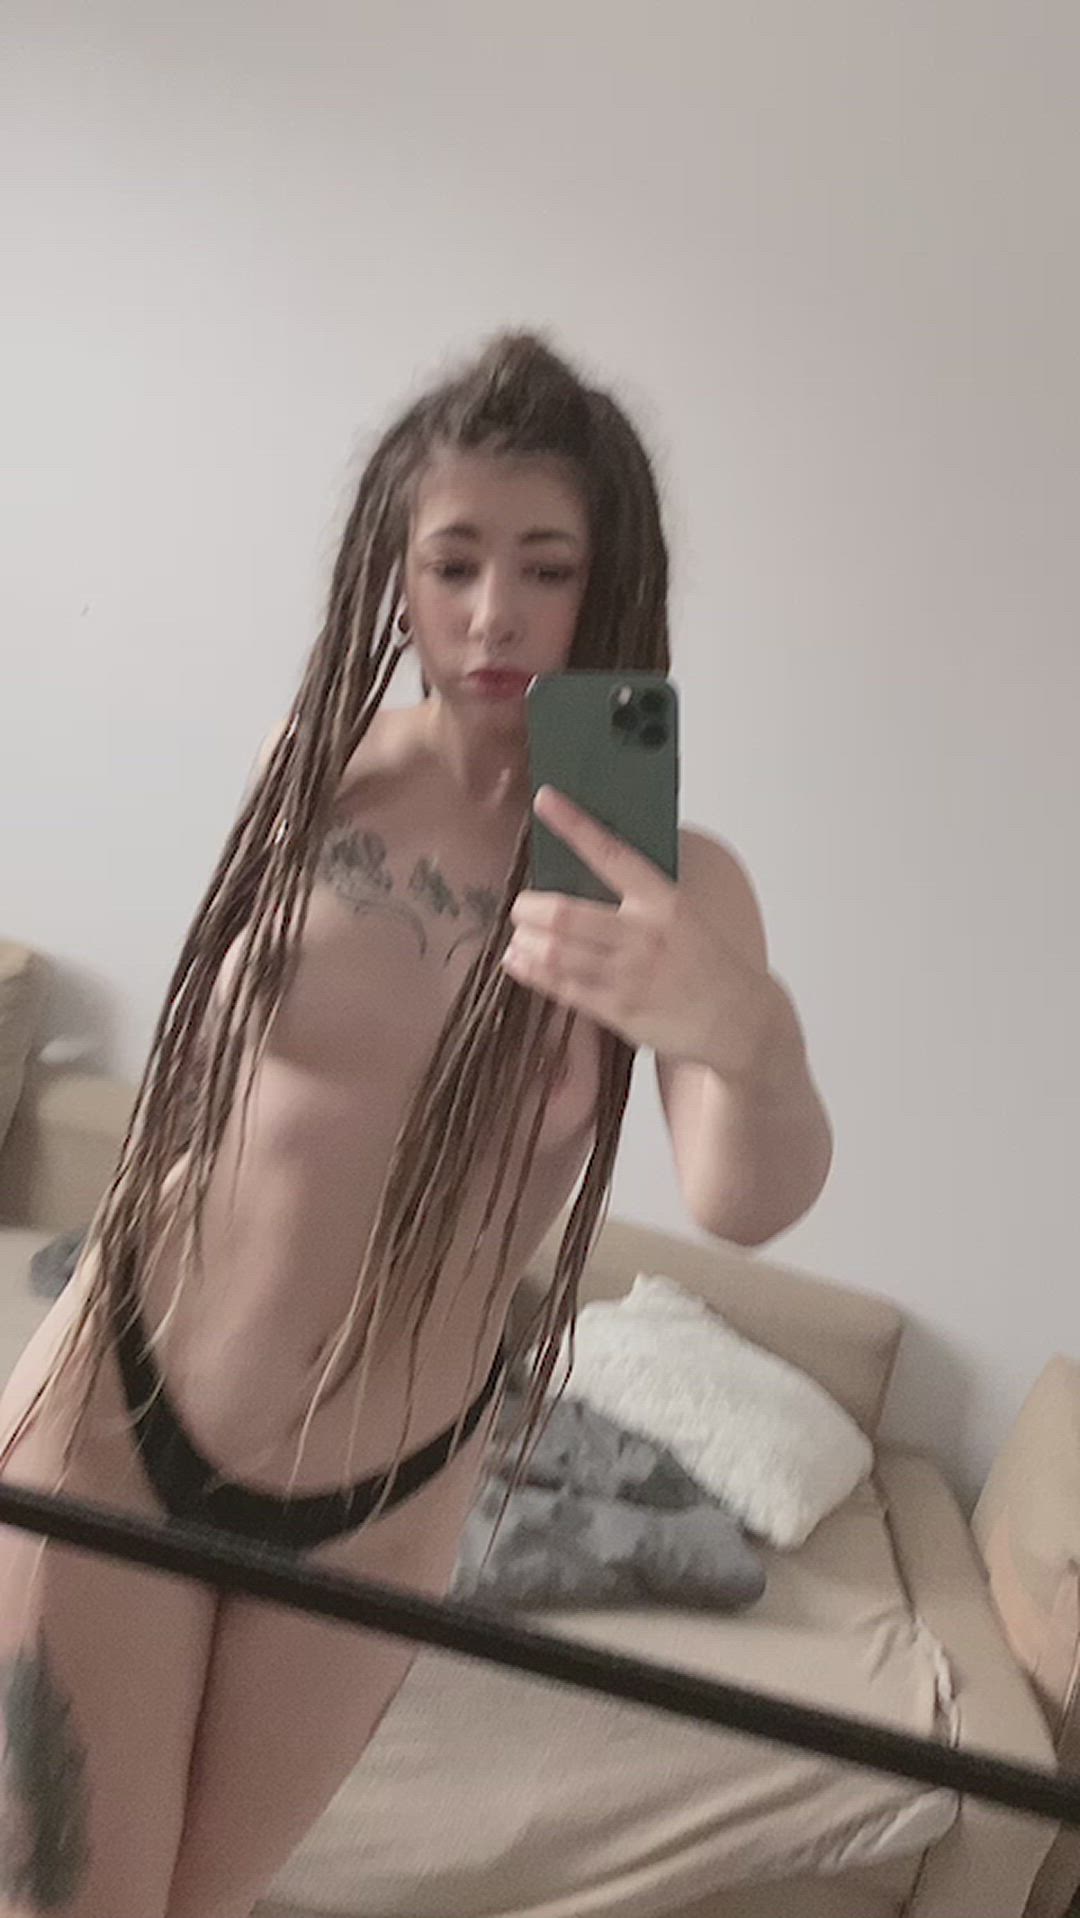 Amateur porn video with onlyfans model Lovely Chris <strong>@lovelychris</strong>